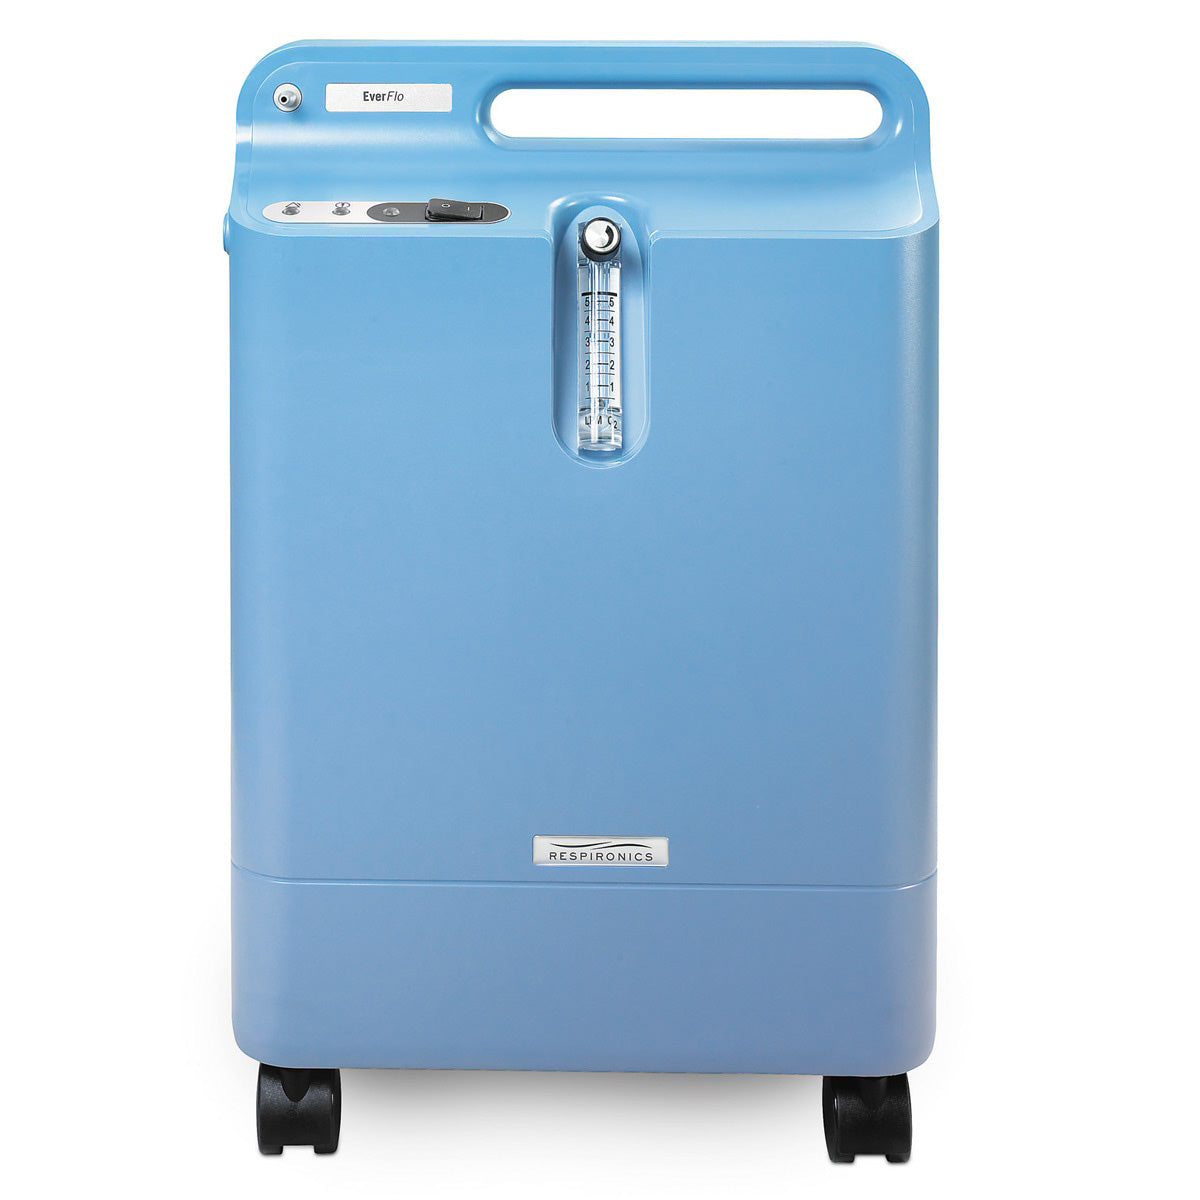 EverFlo Oxygen Concentrator front view.